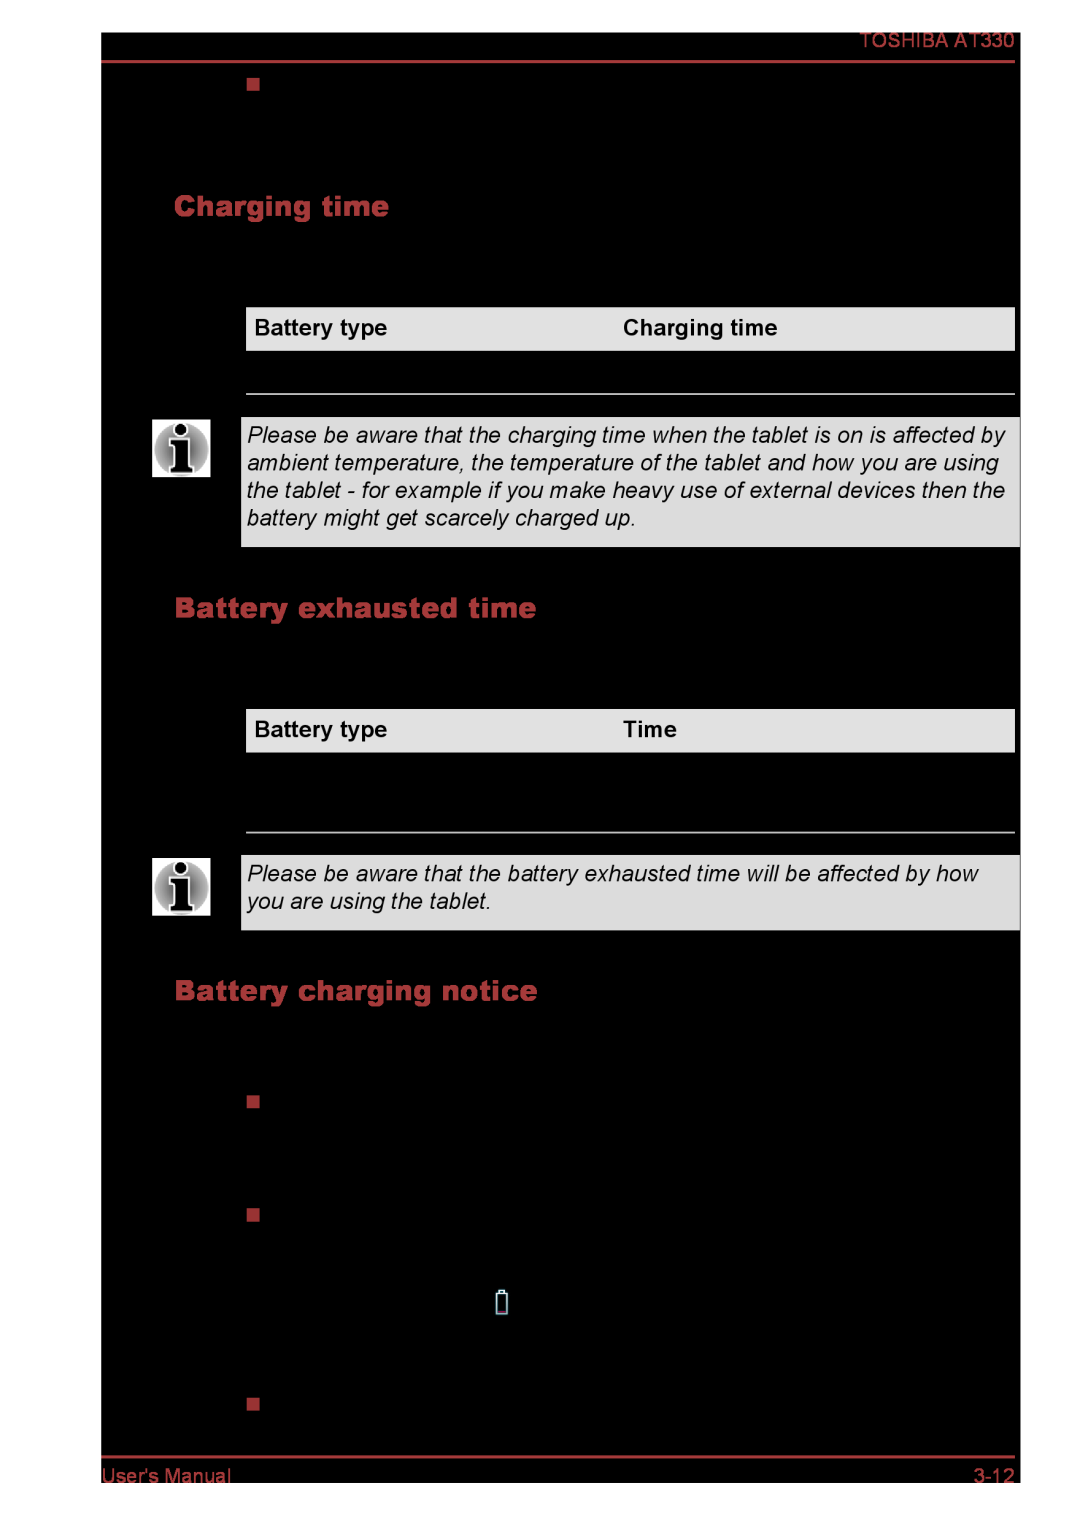 Toshiba at330 Charging time, Battery exhausted time, Battery charging notice, Battery type, Battery 3 cell, 37.2Wh, Time 